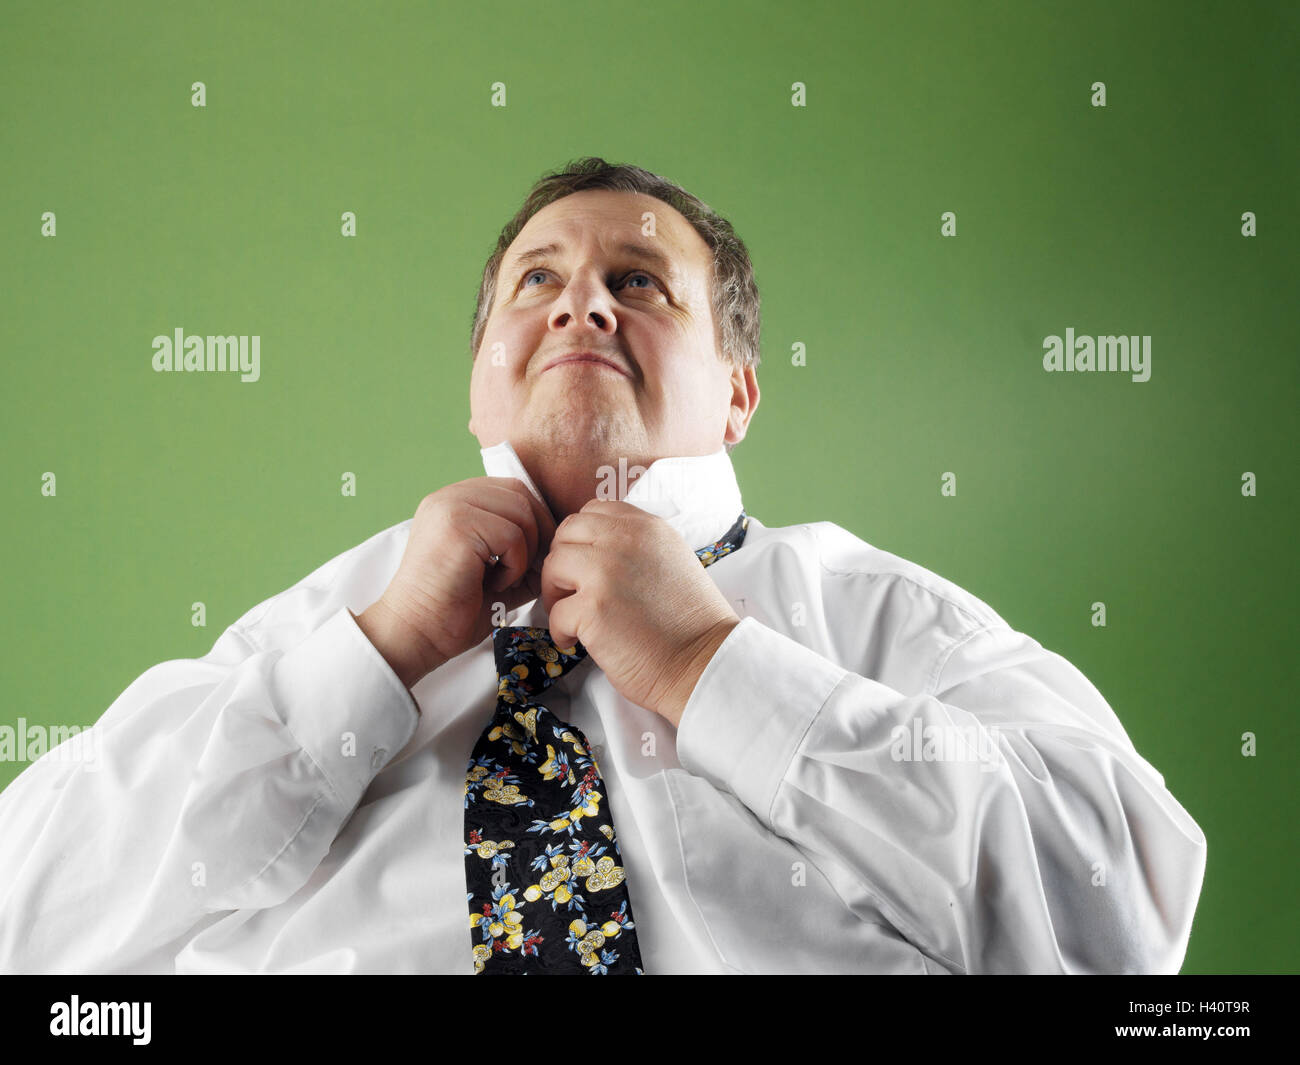 Man, overweight, dress, shirt collars, closely, portrait, middle old person, thickly, bold, overweight, adiposity, obesity, fatly, obesity, body weight, perimetre, voluminously, increase in weight, body perimetre, increase, pull, shirt, collar, close, pro Stock Photo